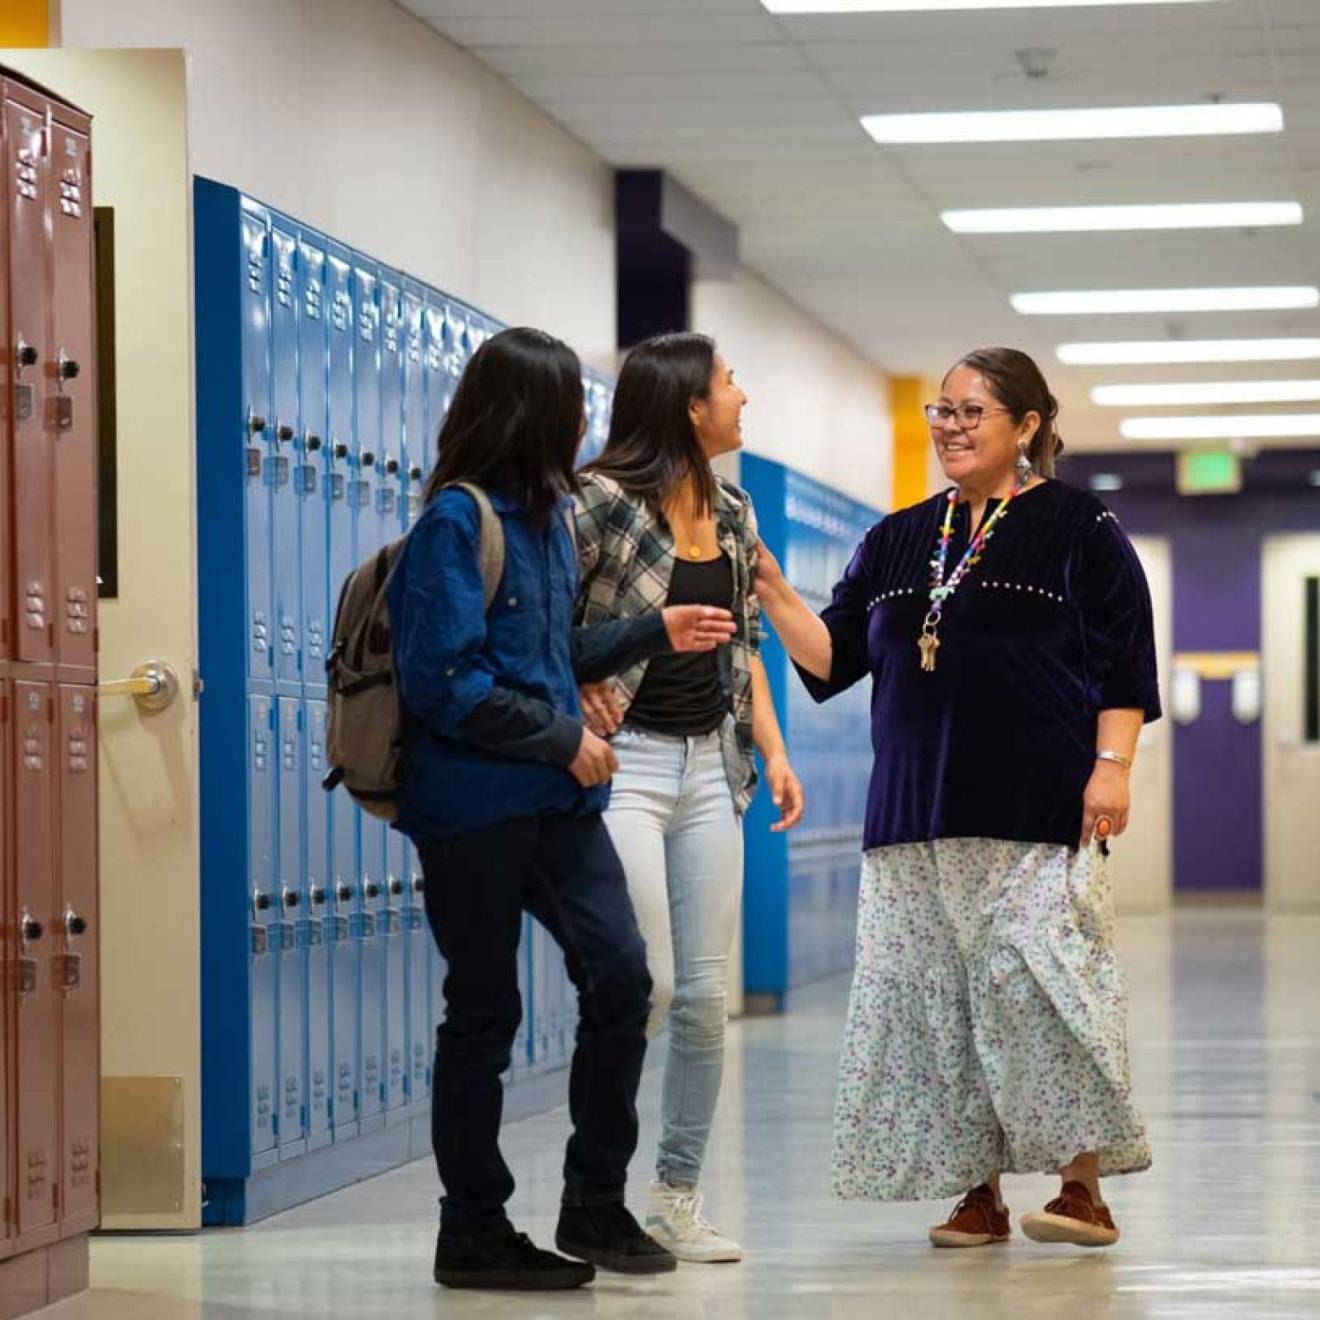 An adult talking with two high school students in a school hallway, with rows of lockers in the background